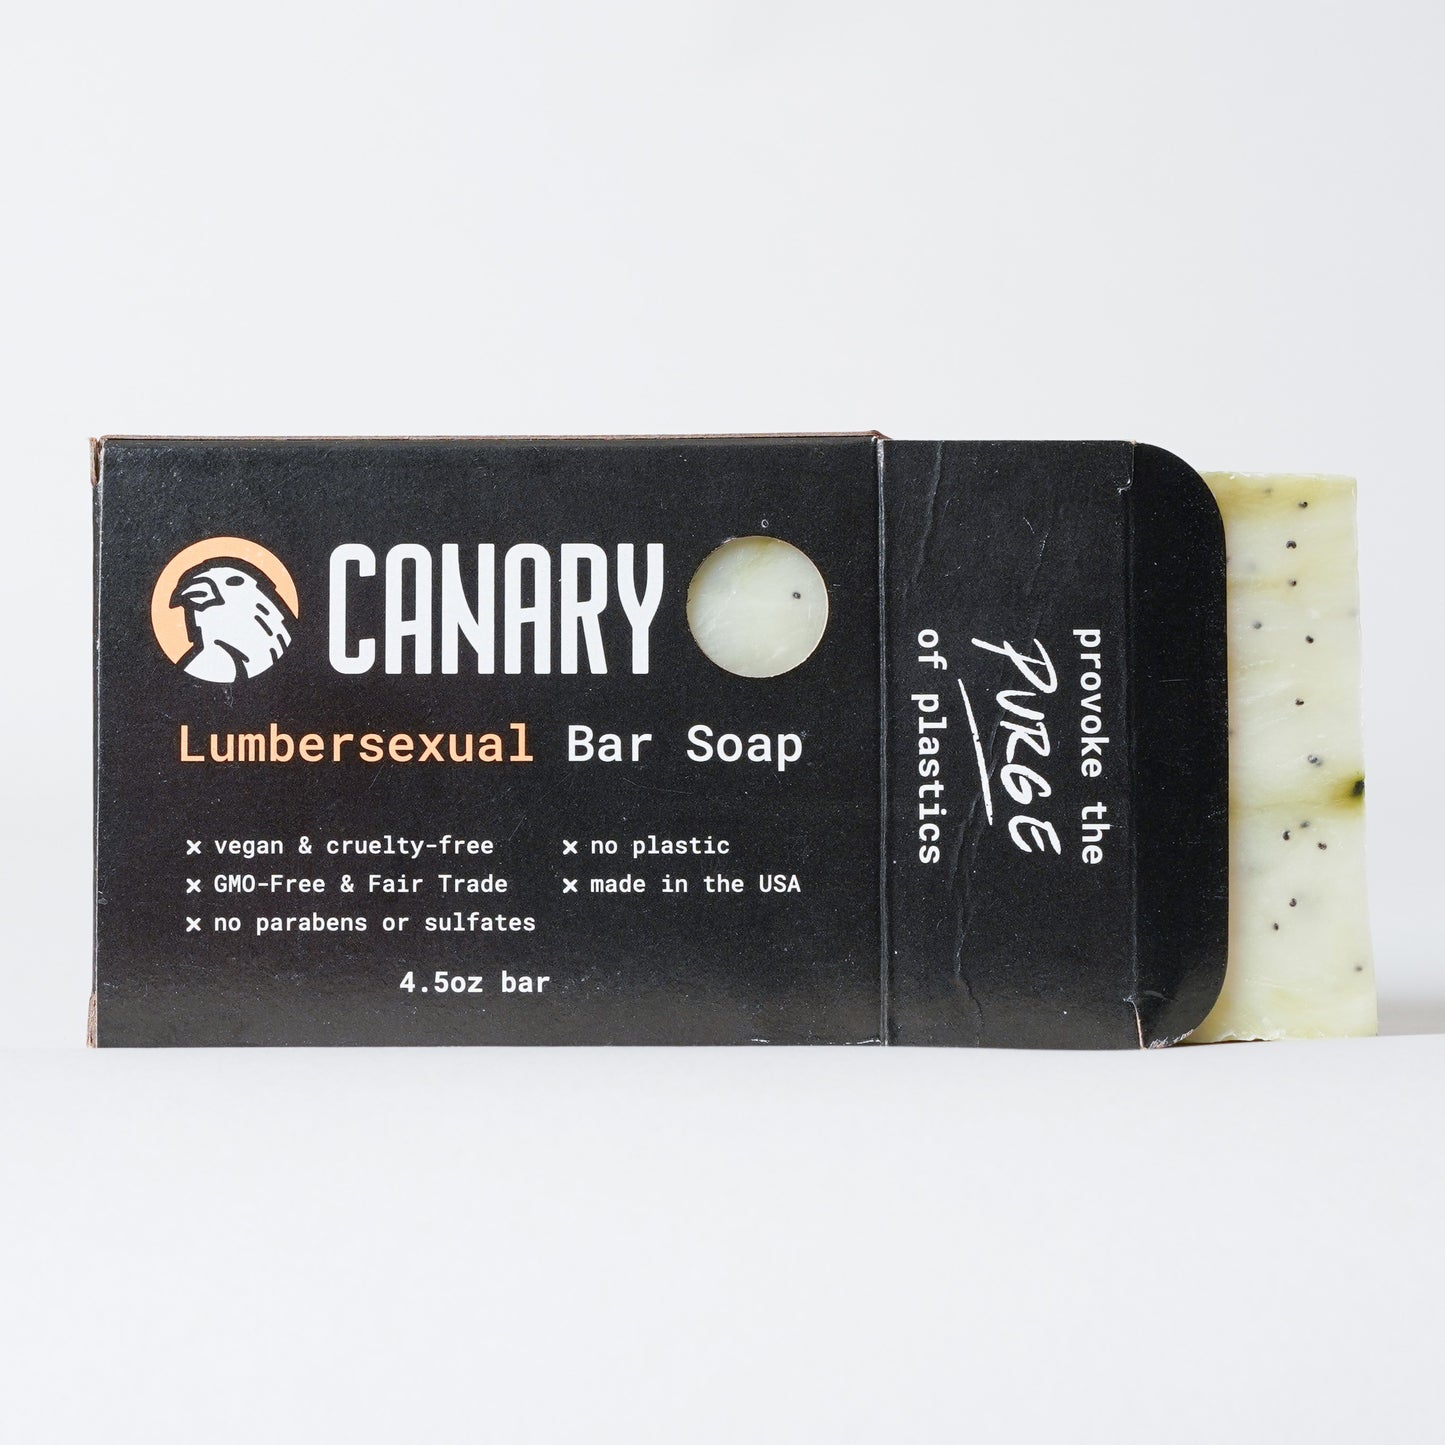 Canary Lumbersexual Bar Soap partially out of its plastic-free packaging